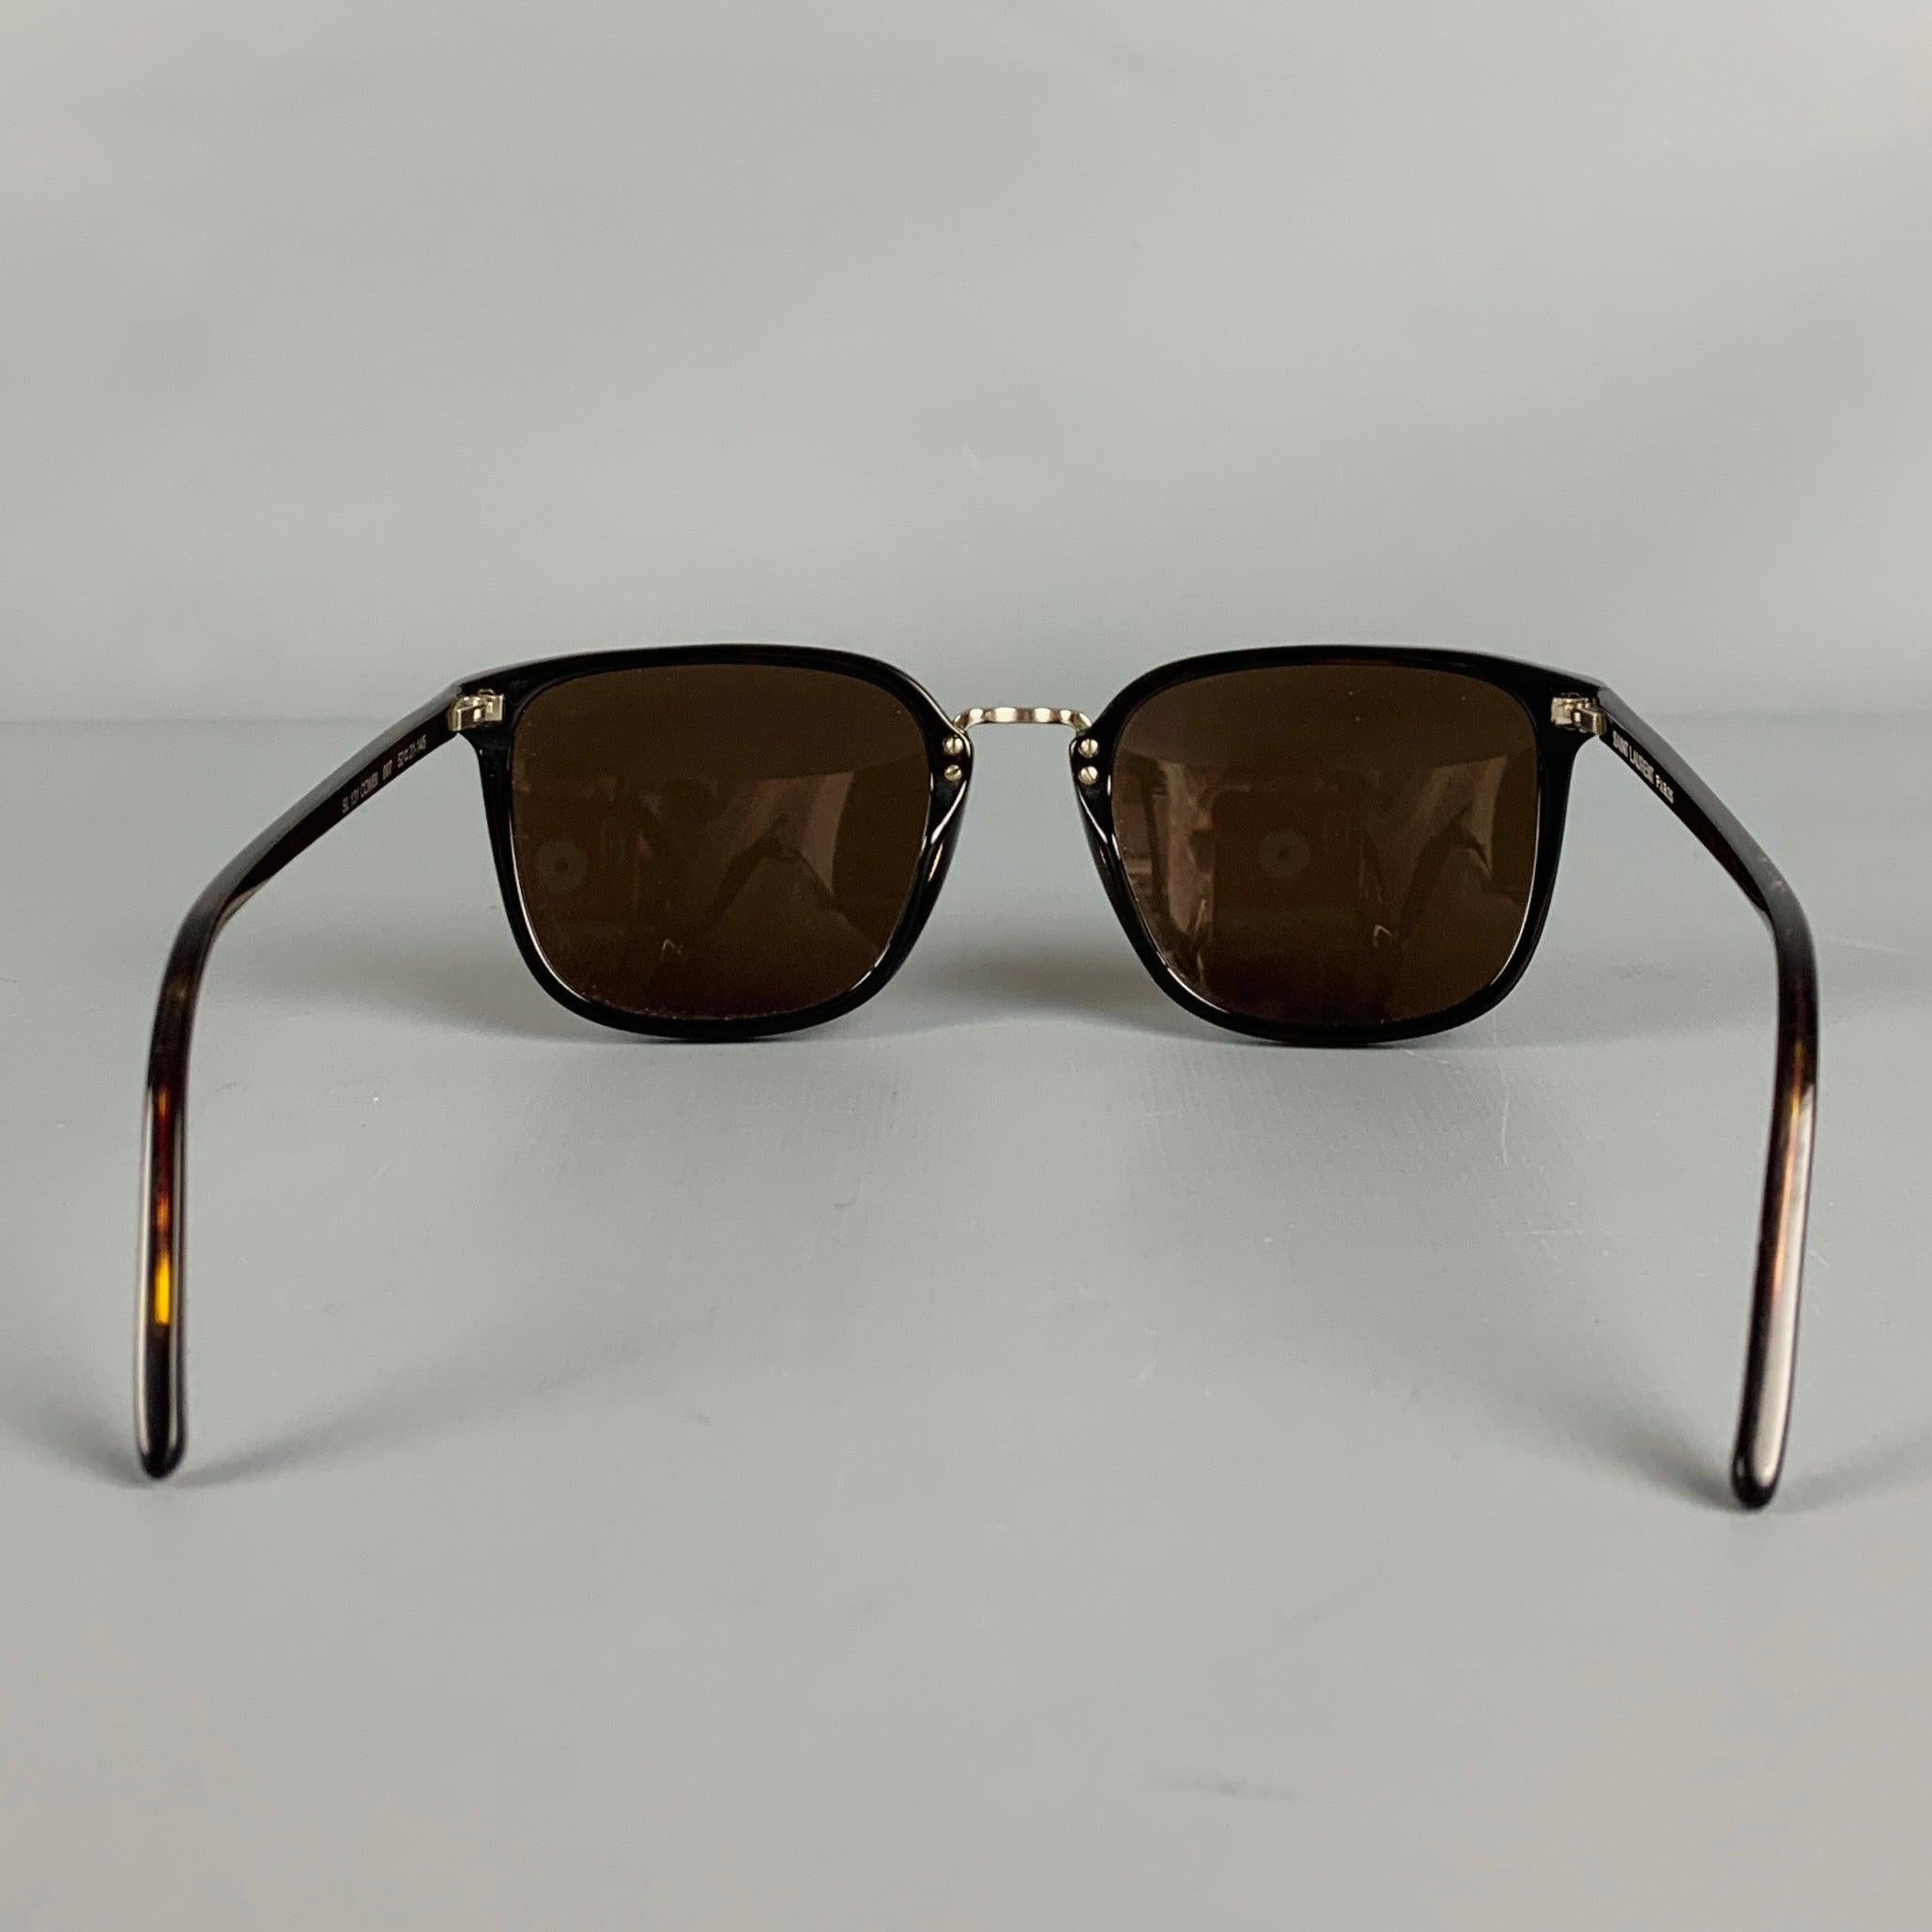 SAINT LAURENT Brown Tortoise Shell Acetate Sunglasses In Excellent Condition For Sale In San Francisco, CA